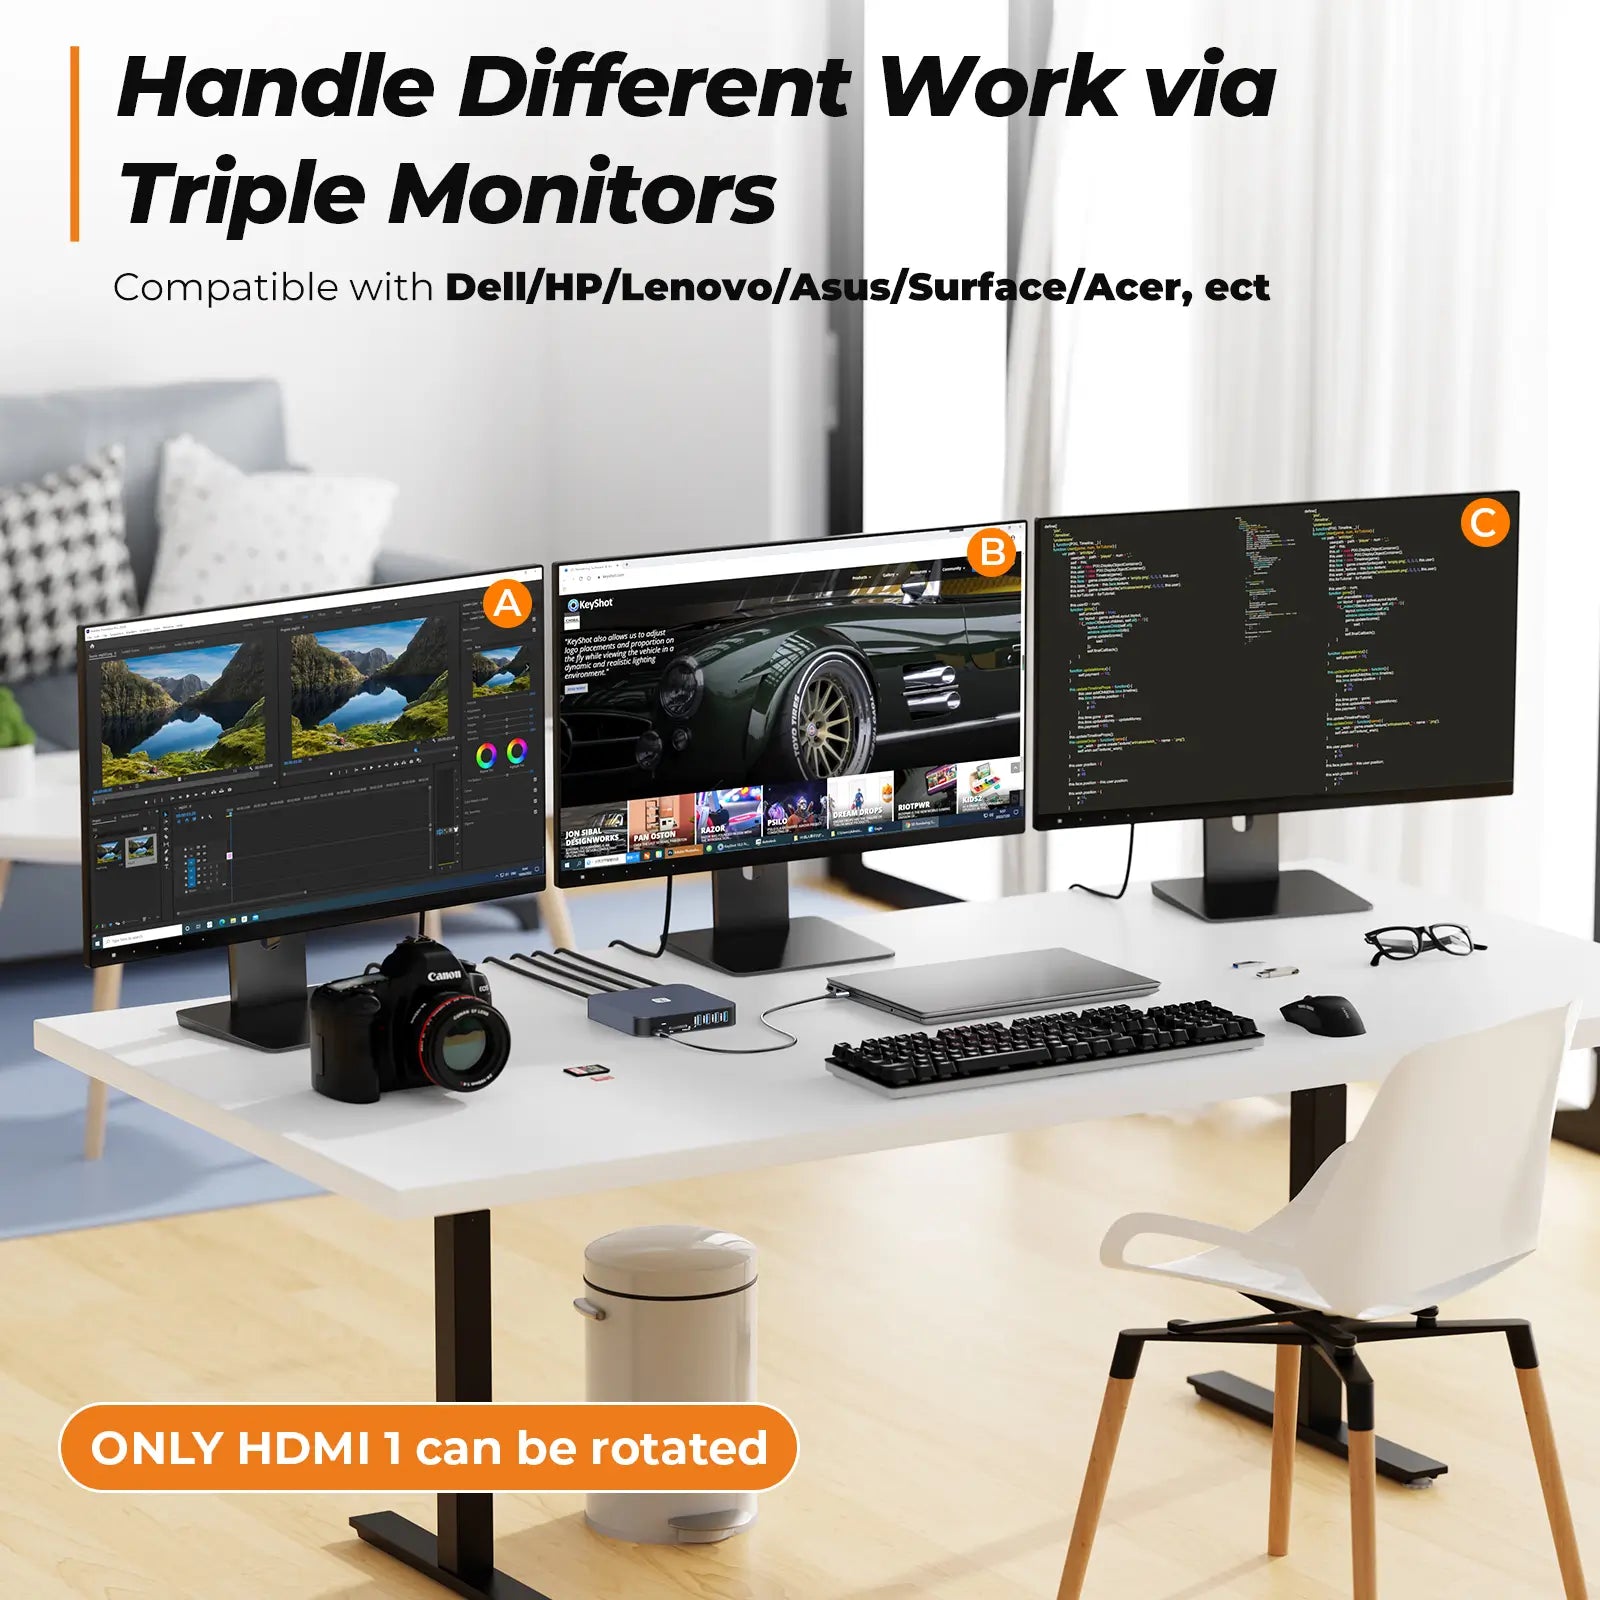 Triple Monitor Laptop Dock for Dell